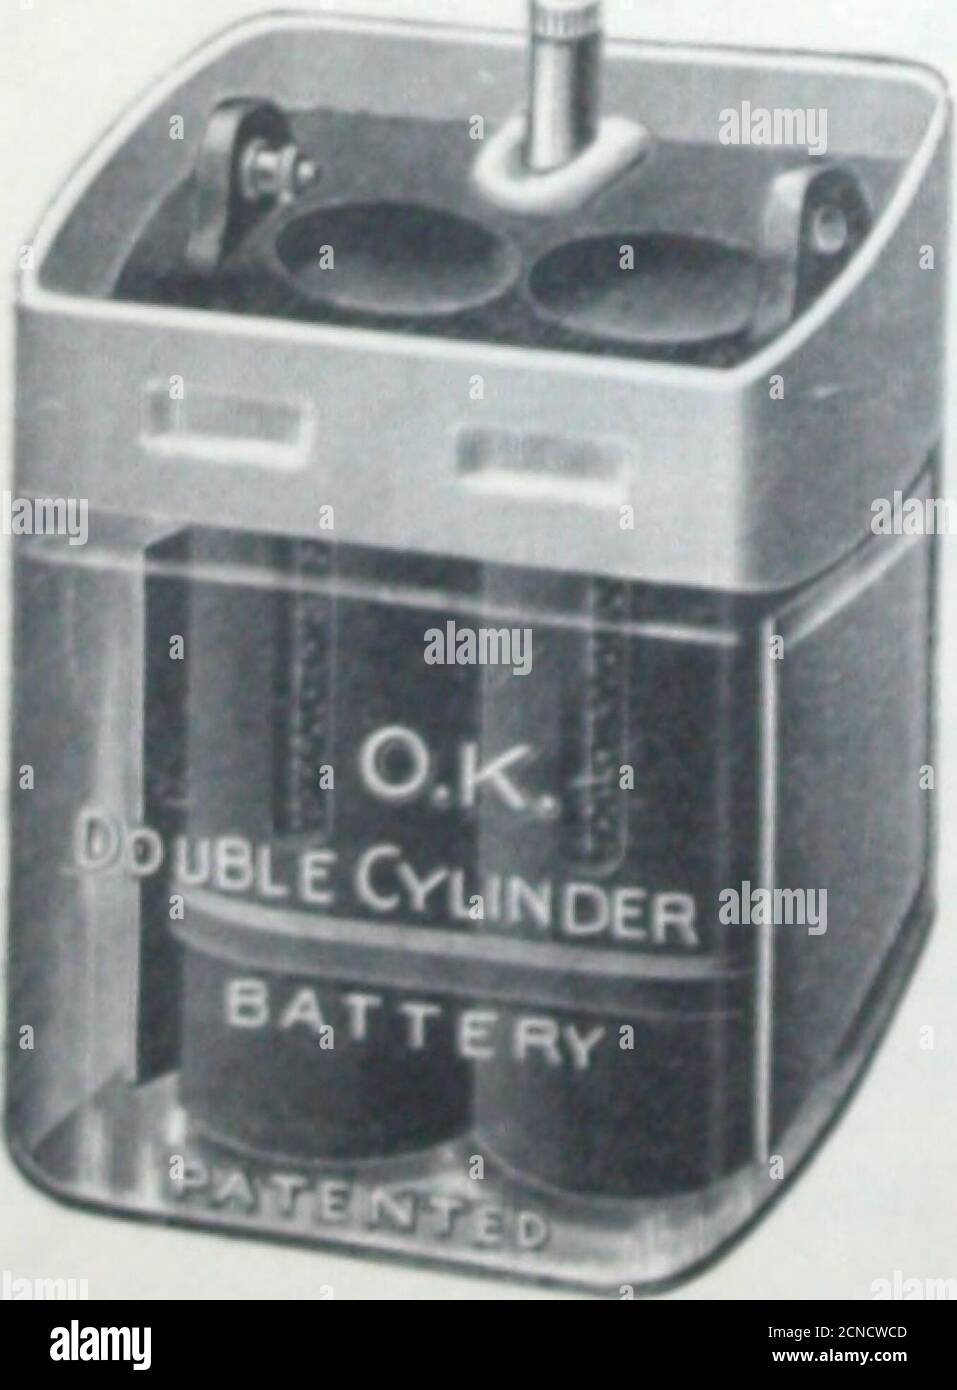 . Illustrated catalogue and price list of bells, electric gas burners, batteries, push buttons ... . ]- N0 II TY II KCTRIC COMPANY Prices of Permanent Parts Edison-Lalande Cells Cat t 11 l; i w /nd X I 10 I «i»7U 10 Hi inin THE -Q K SAL-AMMONIAC BATTERY Double Cylinder. : PRICE LIST 52 & 54 NORTH FOURTH STREET, PHILADELPHIA, PA. ZINCS Rod Zincs Cat. No. phk u 672. Square , each, ... 678. Round, each 87 i. Round r it h Lug &lt; ast, ti Stock Photo